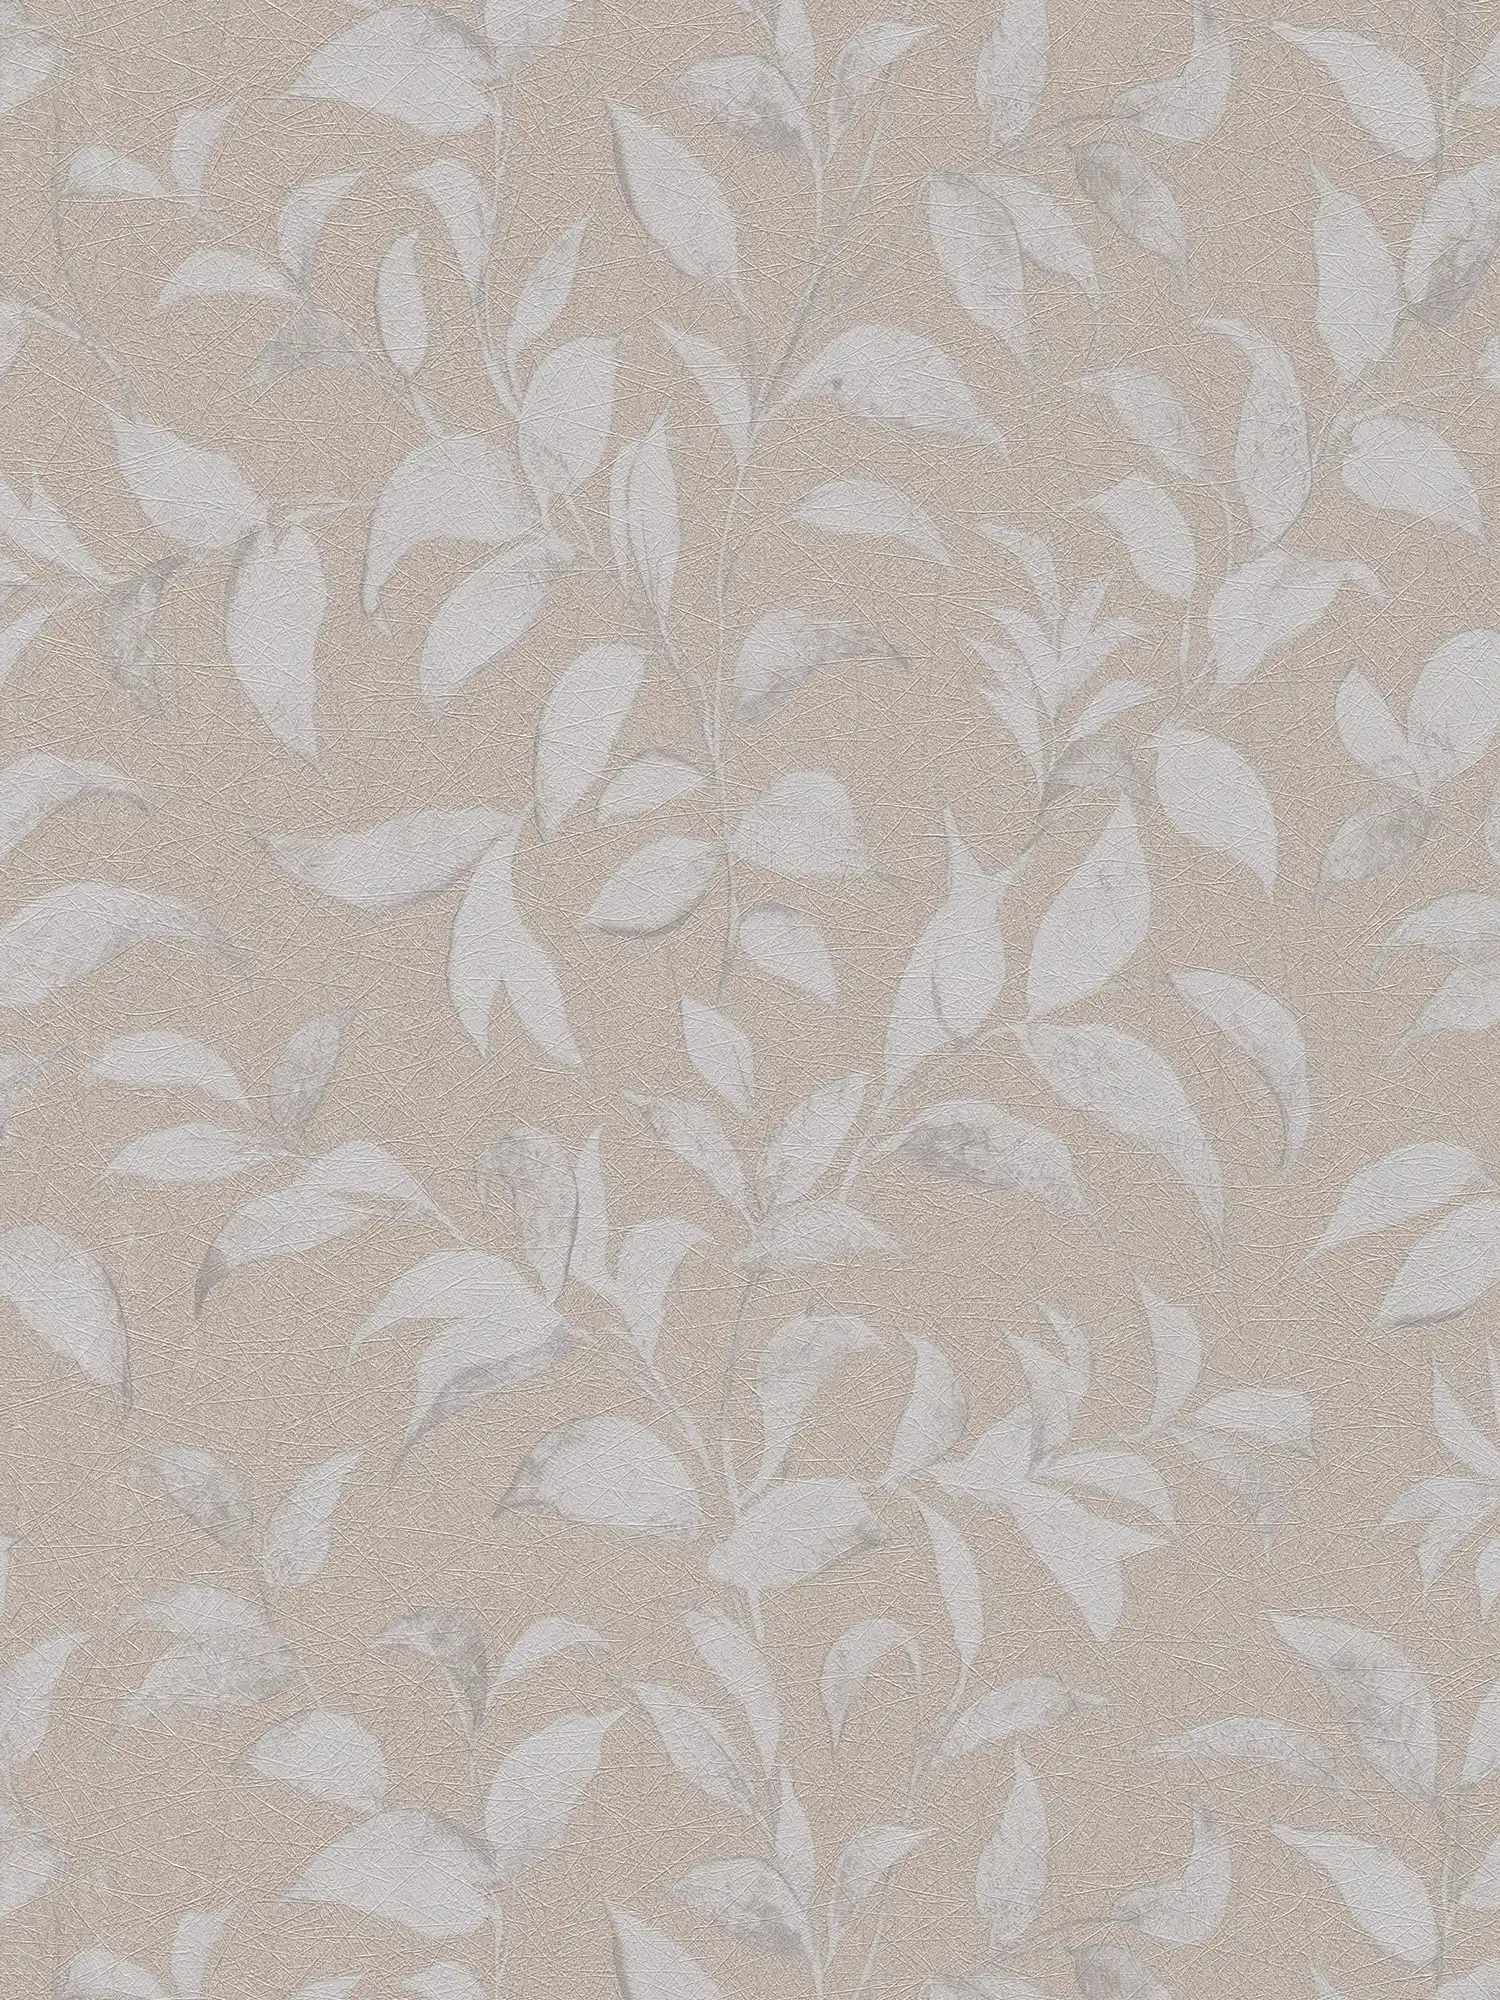 Floral leaves wallpaper shimmering textured - grey, silver
